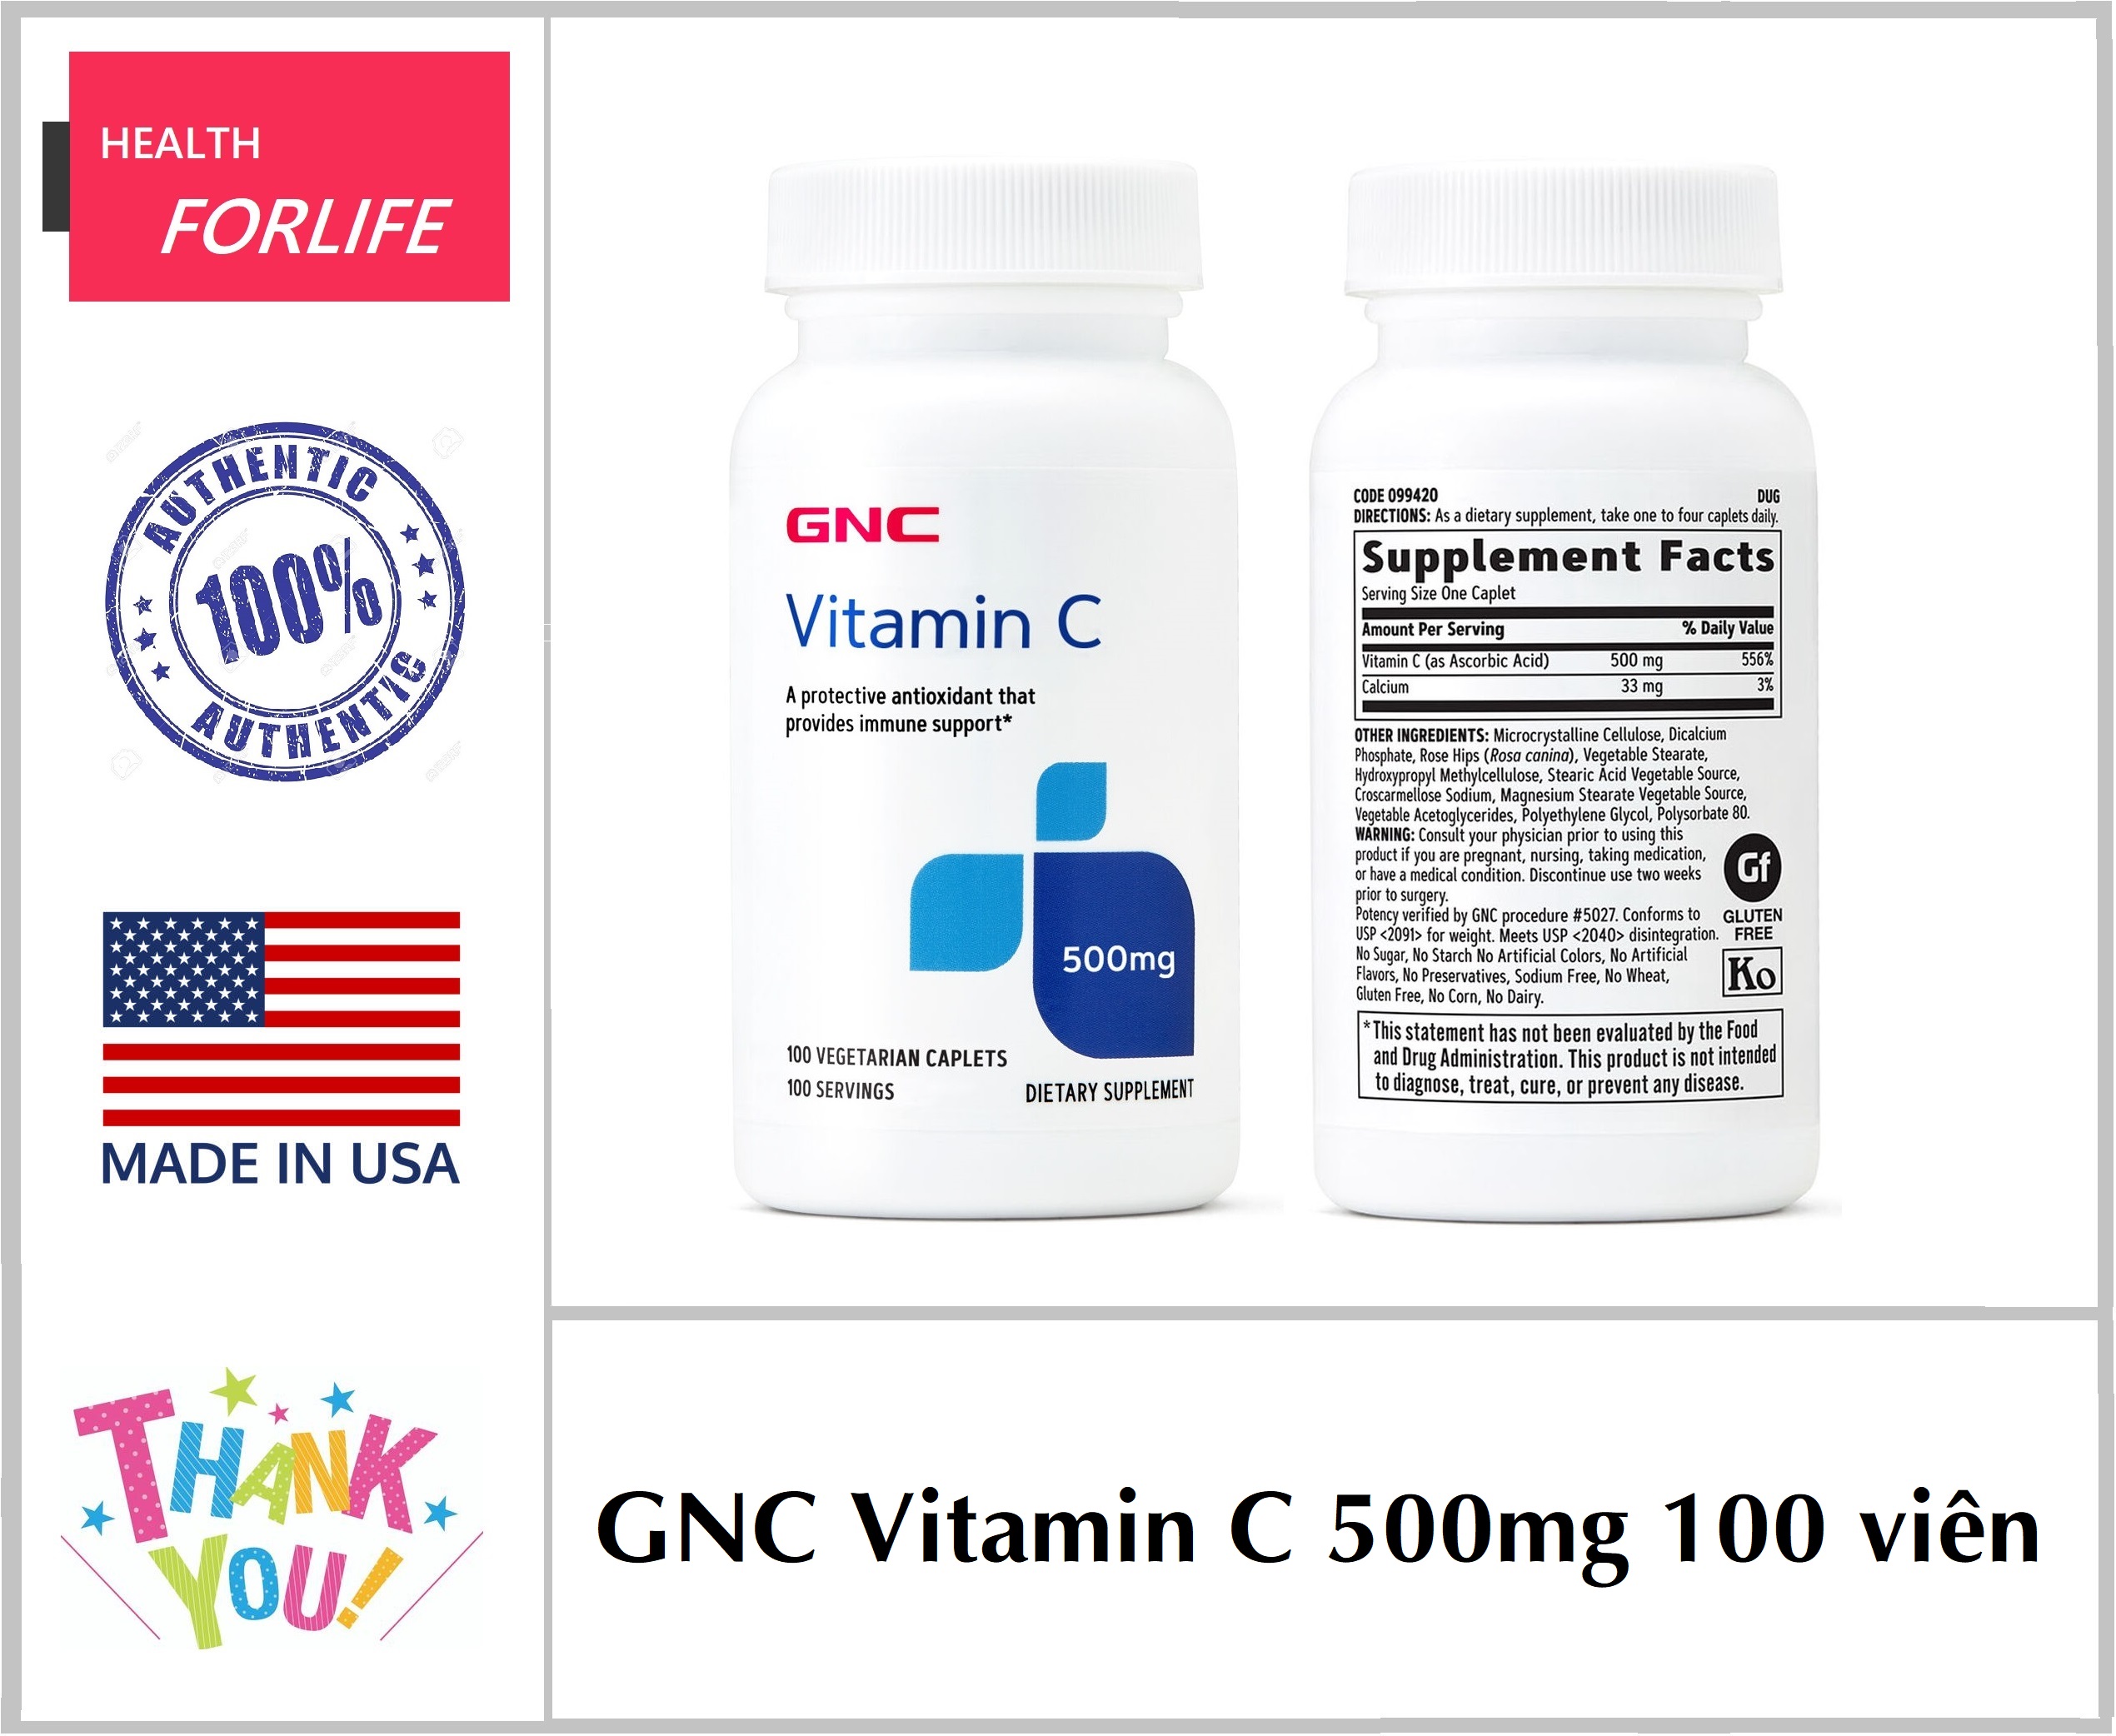 GNC Vitamin C 500 mg 100 tablets strengthens the immune system and body